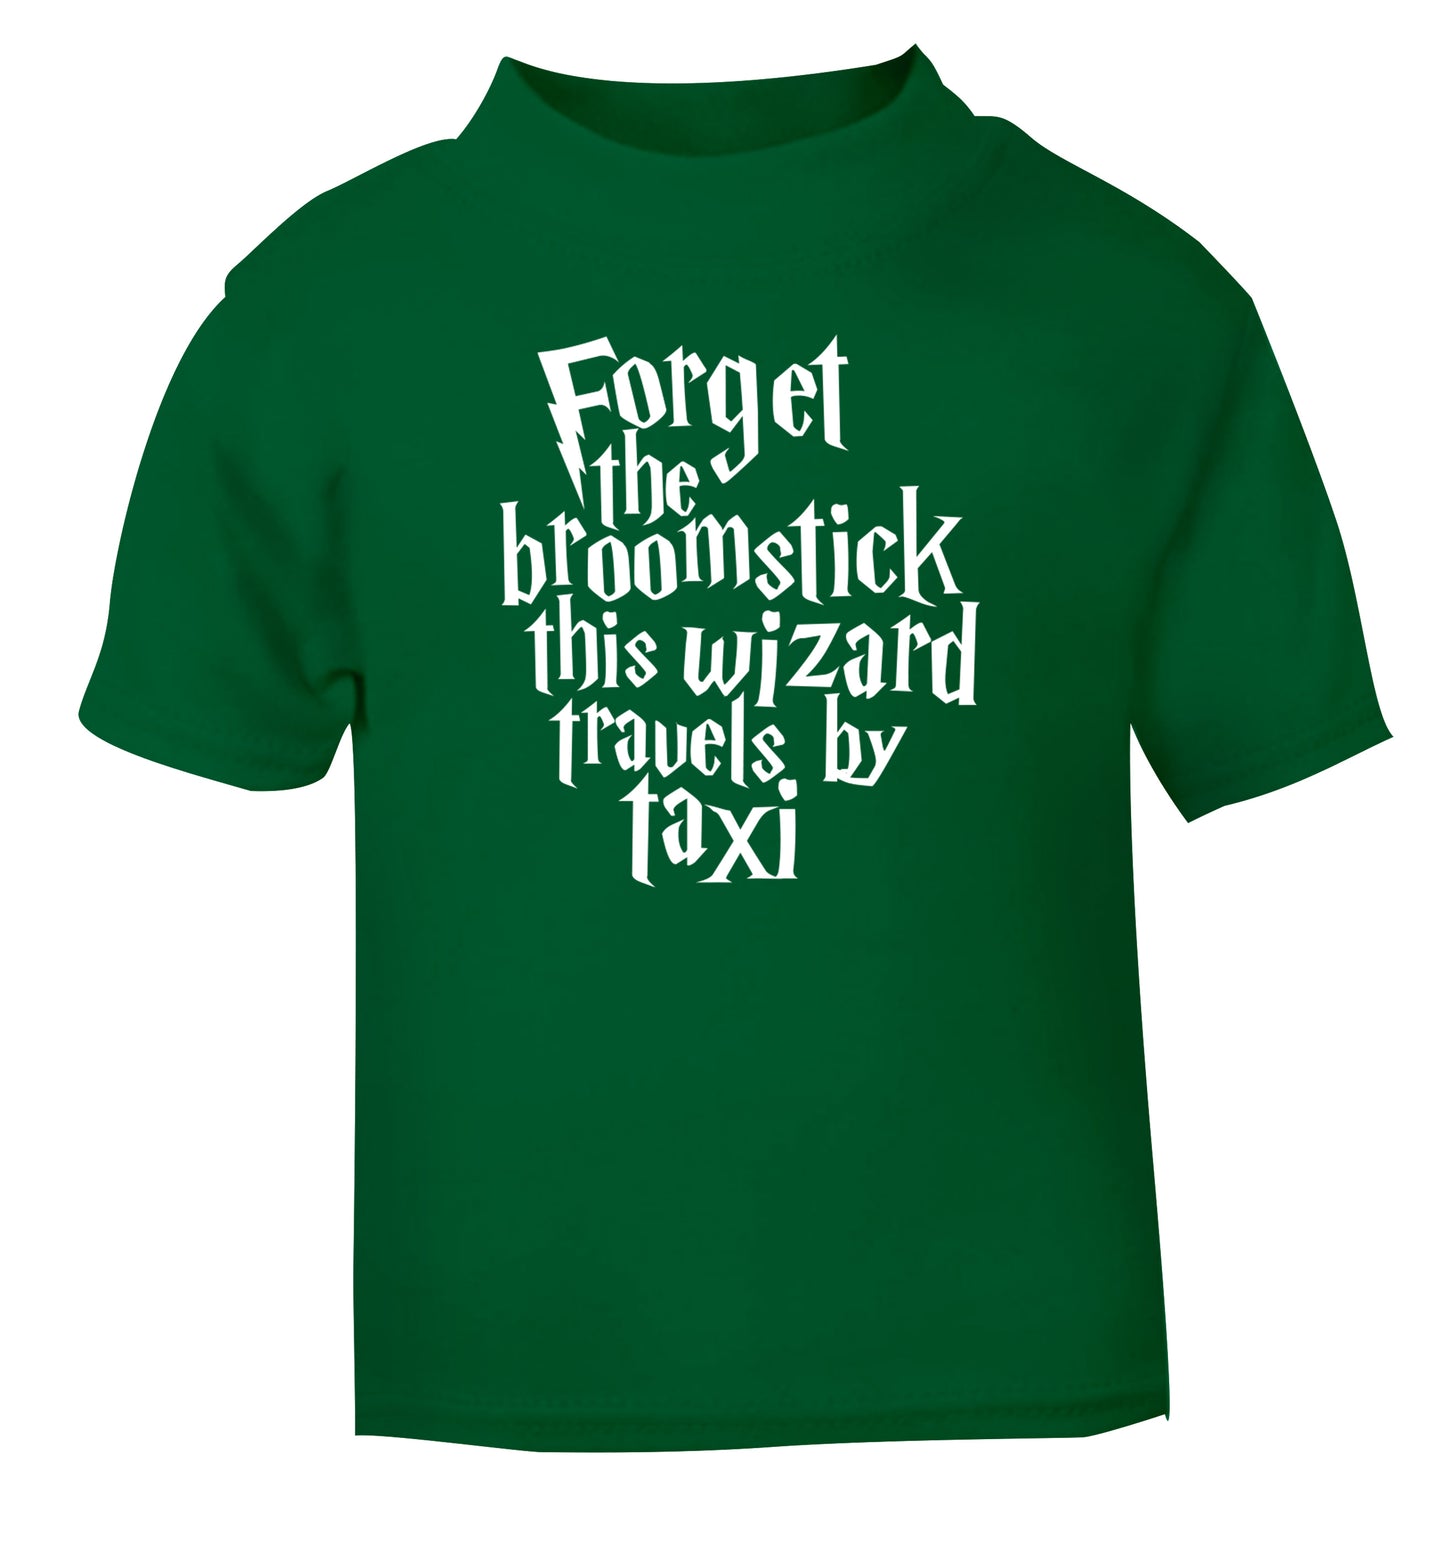 Forget the broomstick this wizard travels by taxi green Baby Toddler Tshirt 2 Years